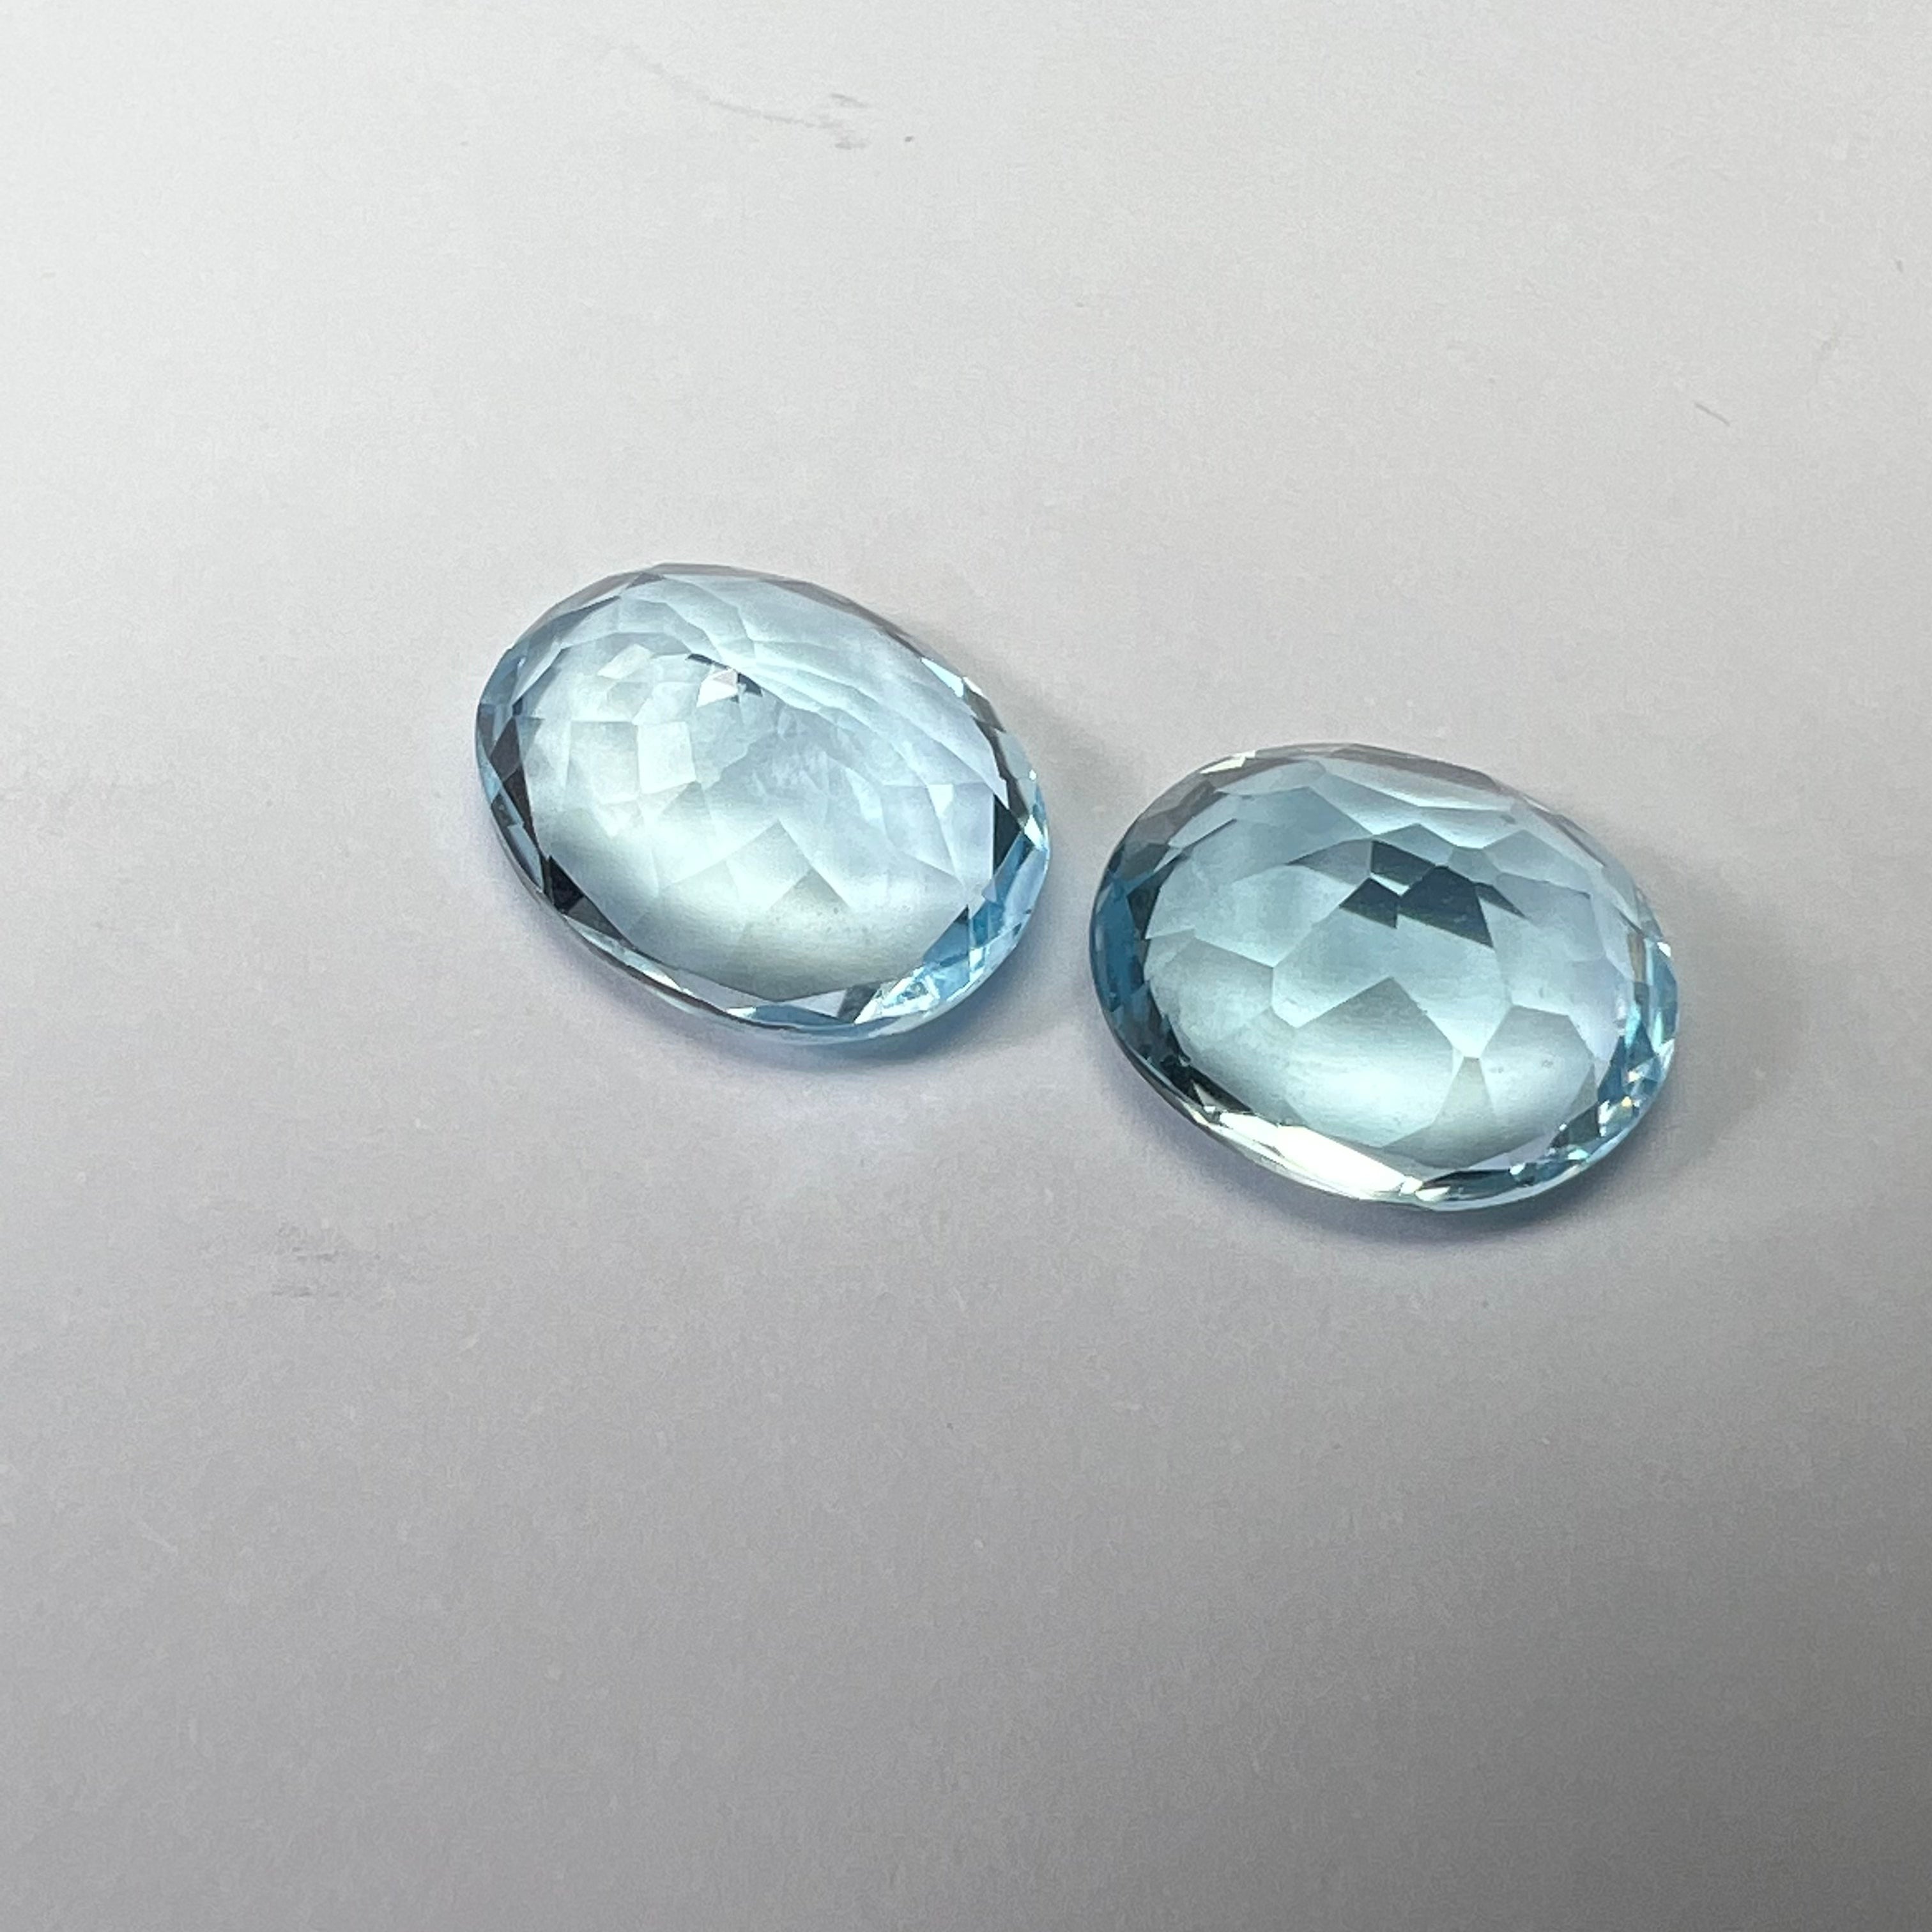 9.97CTW Pair of Loose Natural Oval Cut Topaz 10.95x9.15x6.3mm Earth mined Gemstone